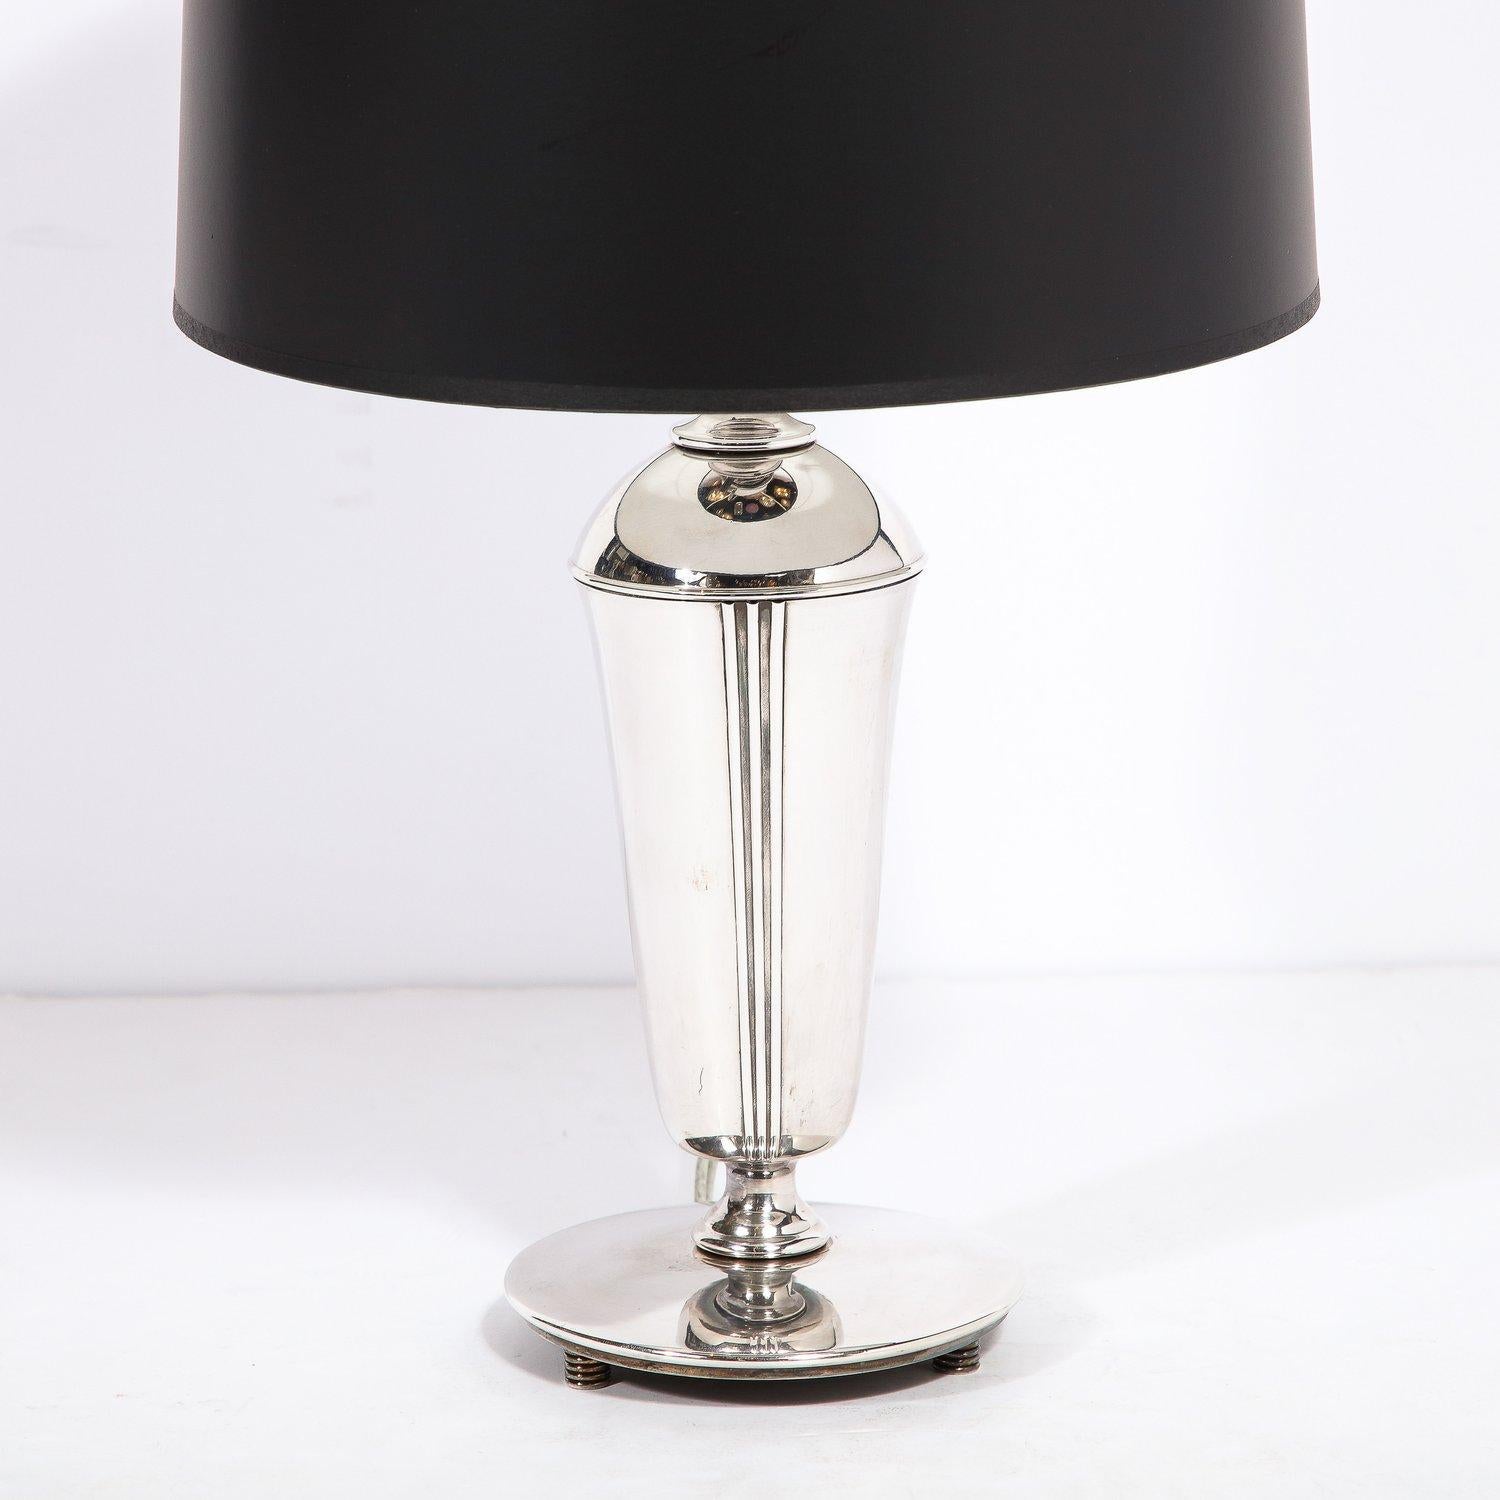 American Art Deco Machine Age Skyscraper Style Banded Streamlined Chrome Table Lamp